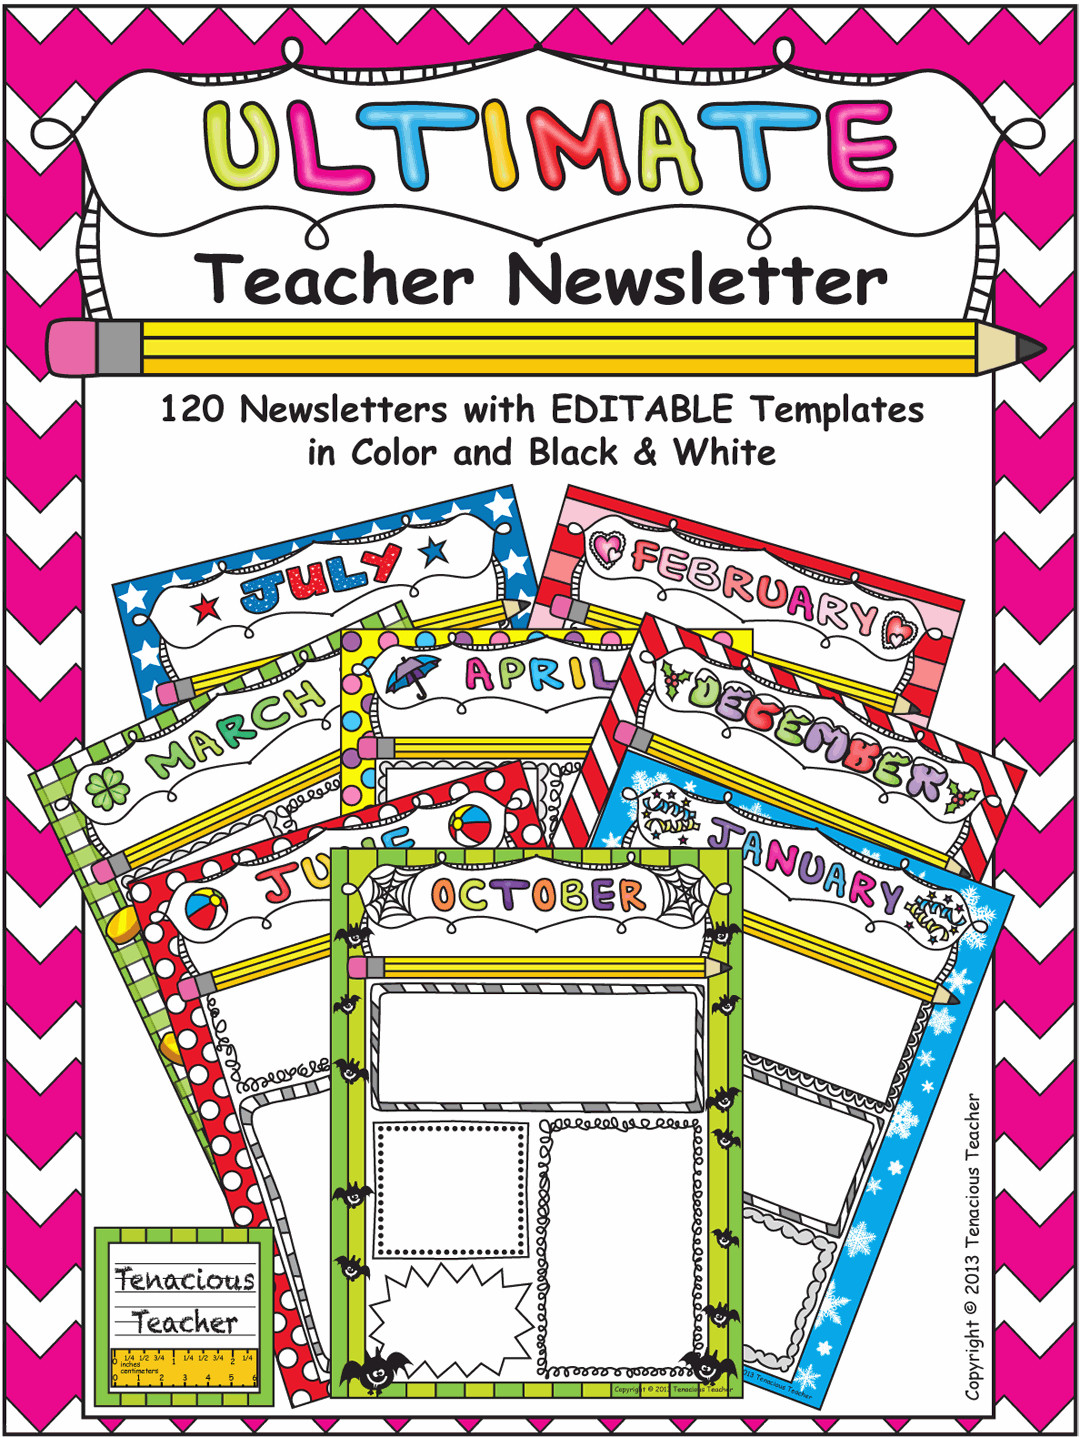 Newsletter Templates for Teachers Ultimate Teacher Newsletter—120 Color and Black and White